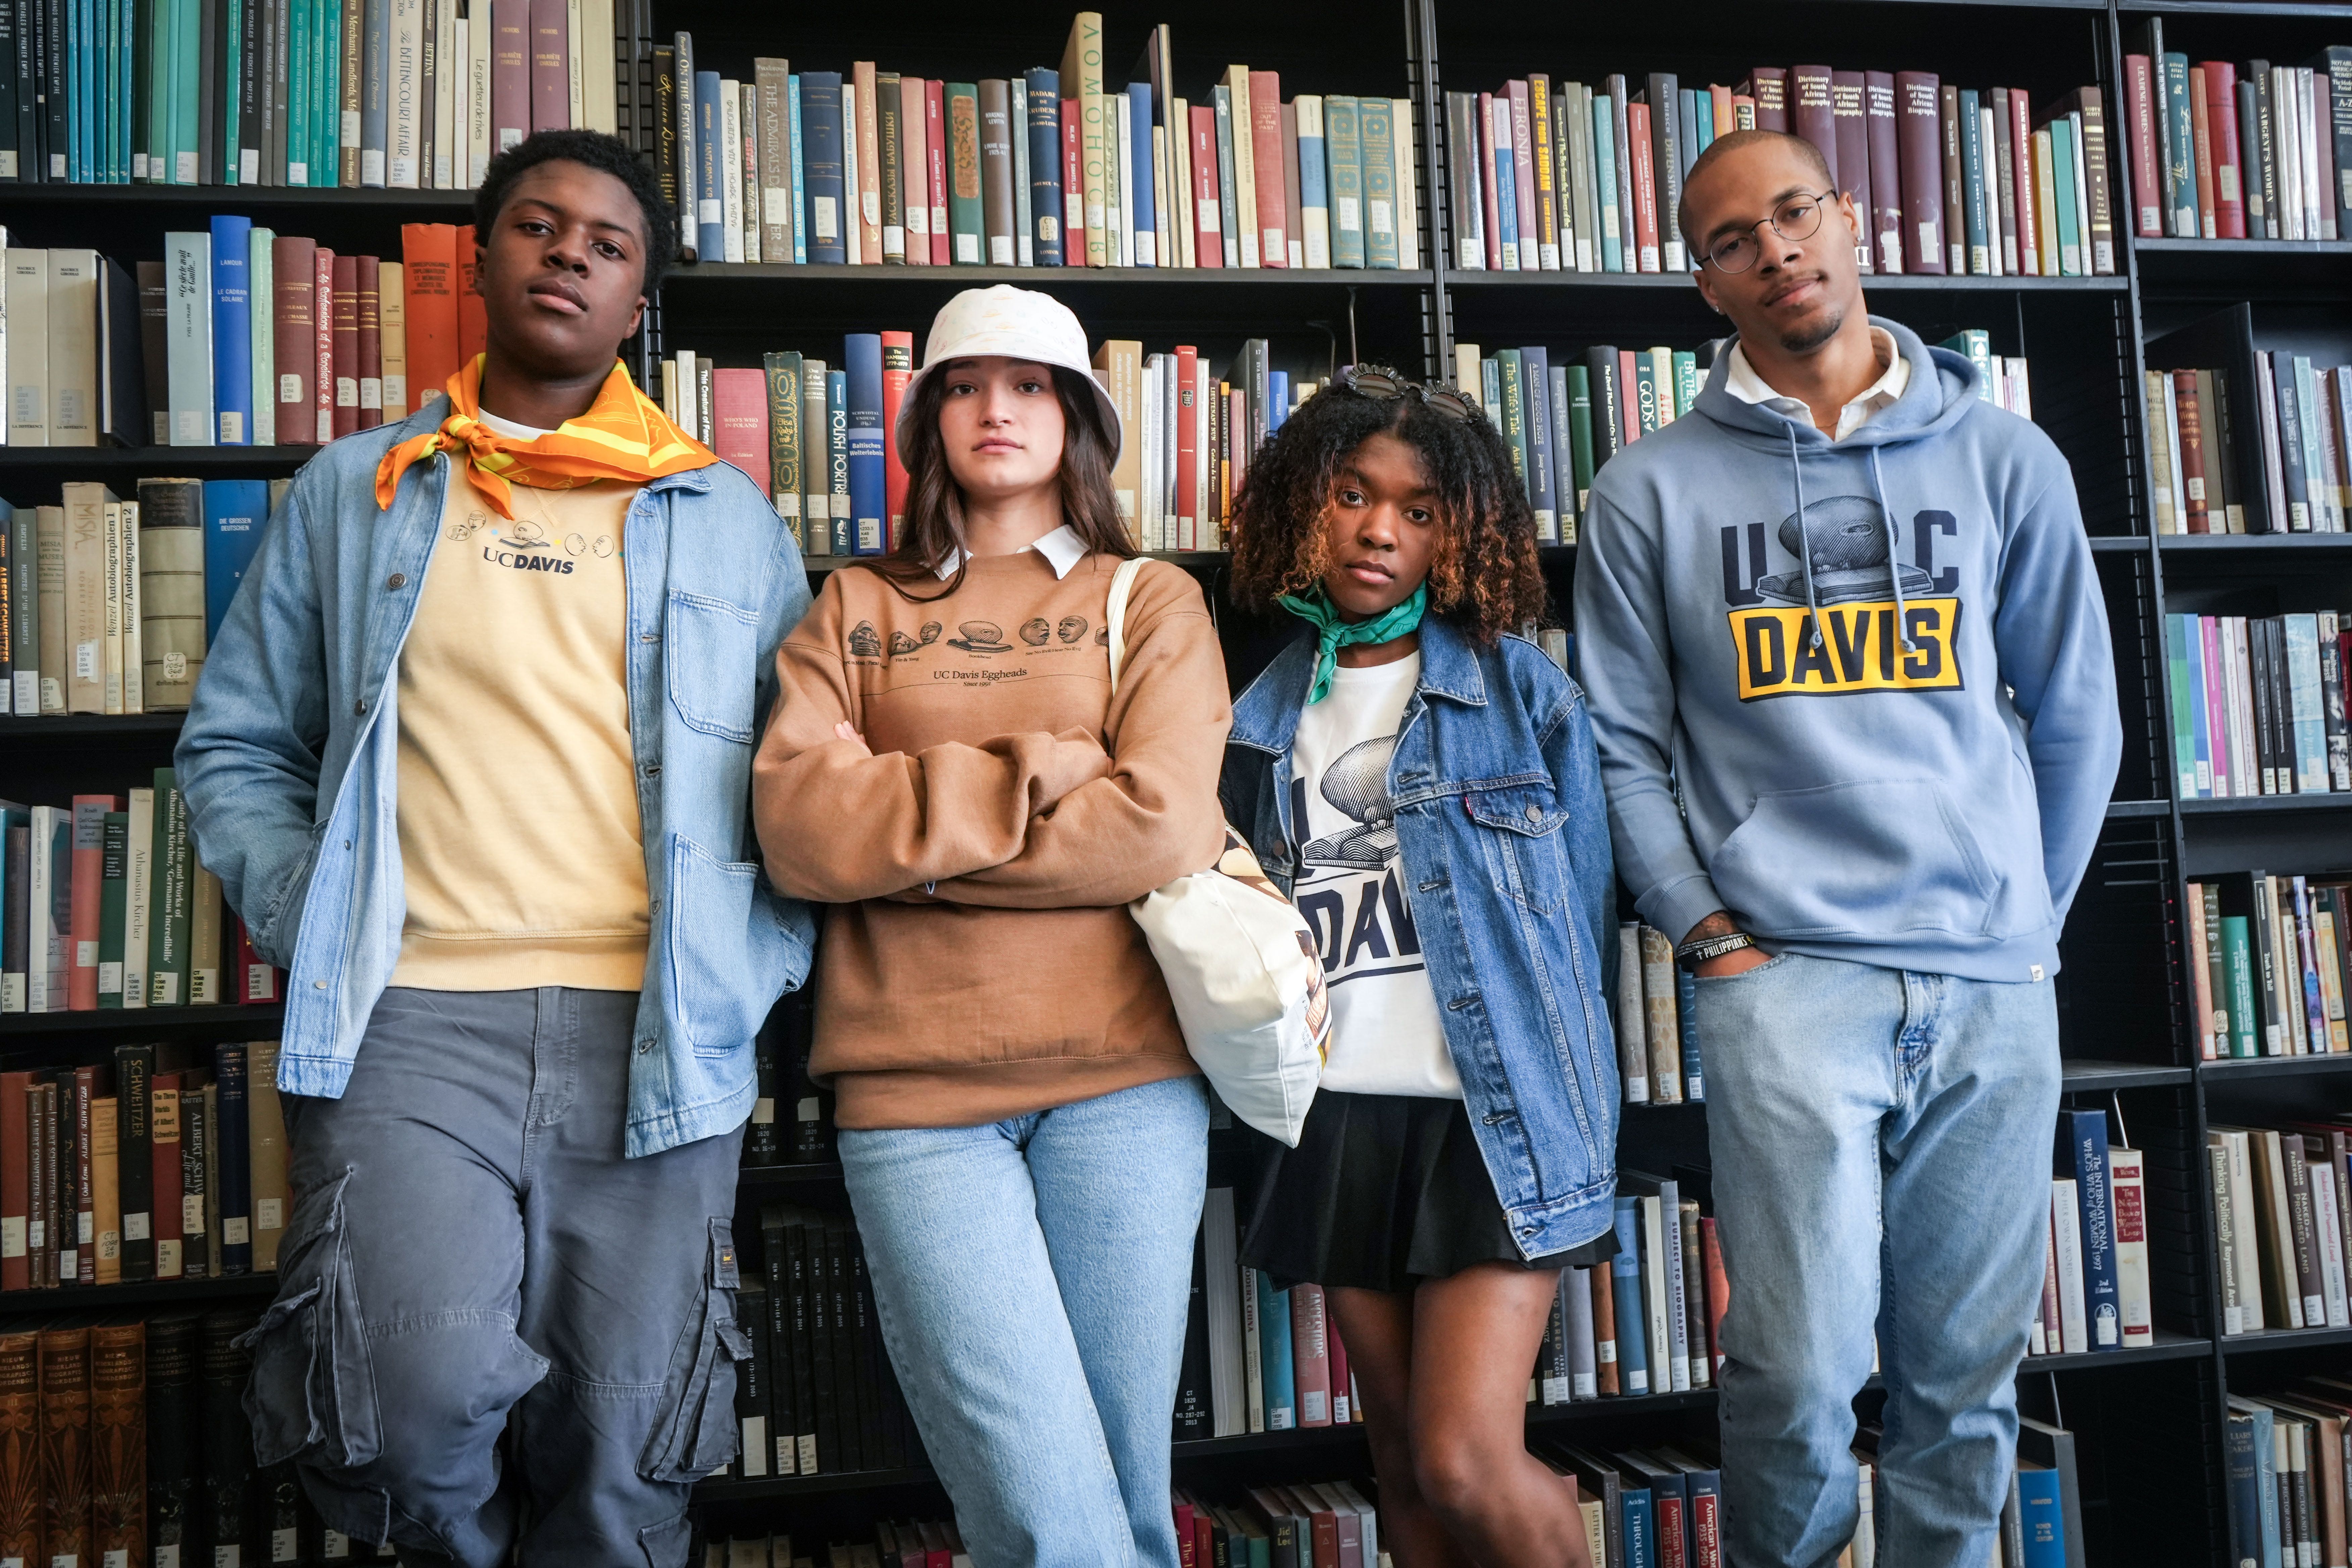 four students stand next to each other and face the camera in a library setting. all four are wearing apparel from the new Arneson Egghead Collection featuring the Egghead sculptures made by former ˽̳ Davis faculty Robert Arneson.